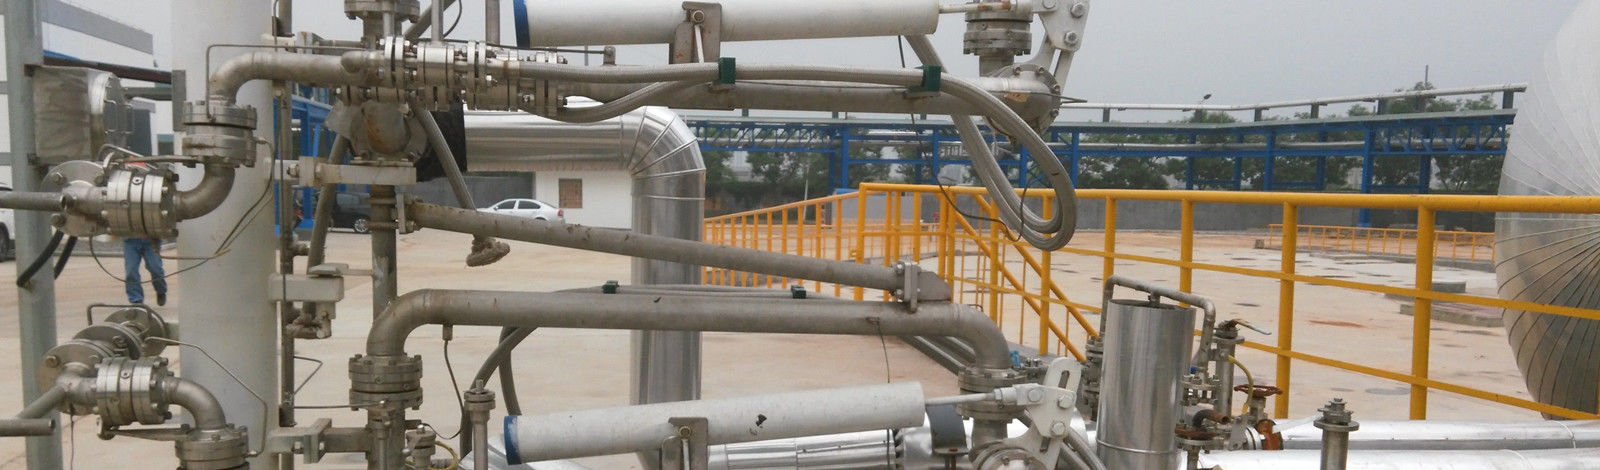 Cryogenic LNG Skid-mounted Land Loading & Measuring System & loading arm for cryogenic service